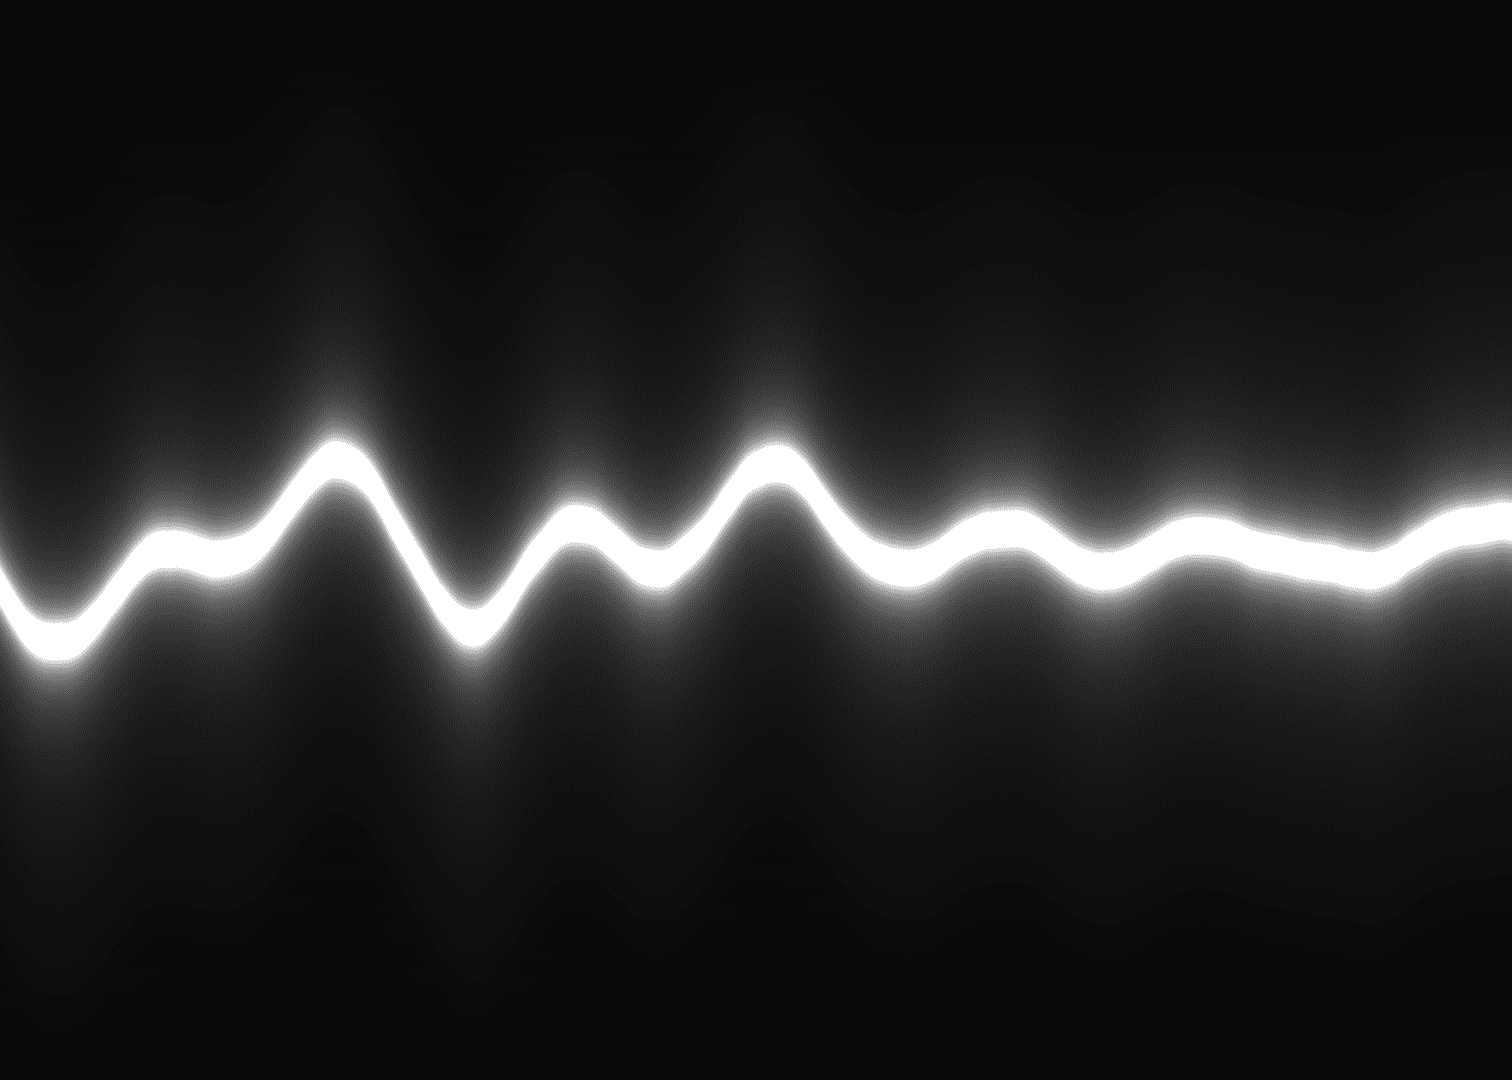 A 2D oscilloscope visualization depicting an audio waveform as a white glowing line-trace.